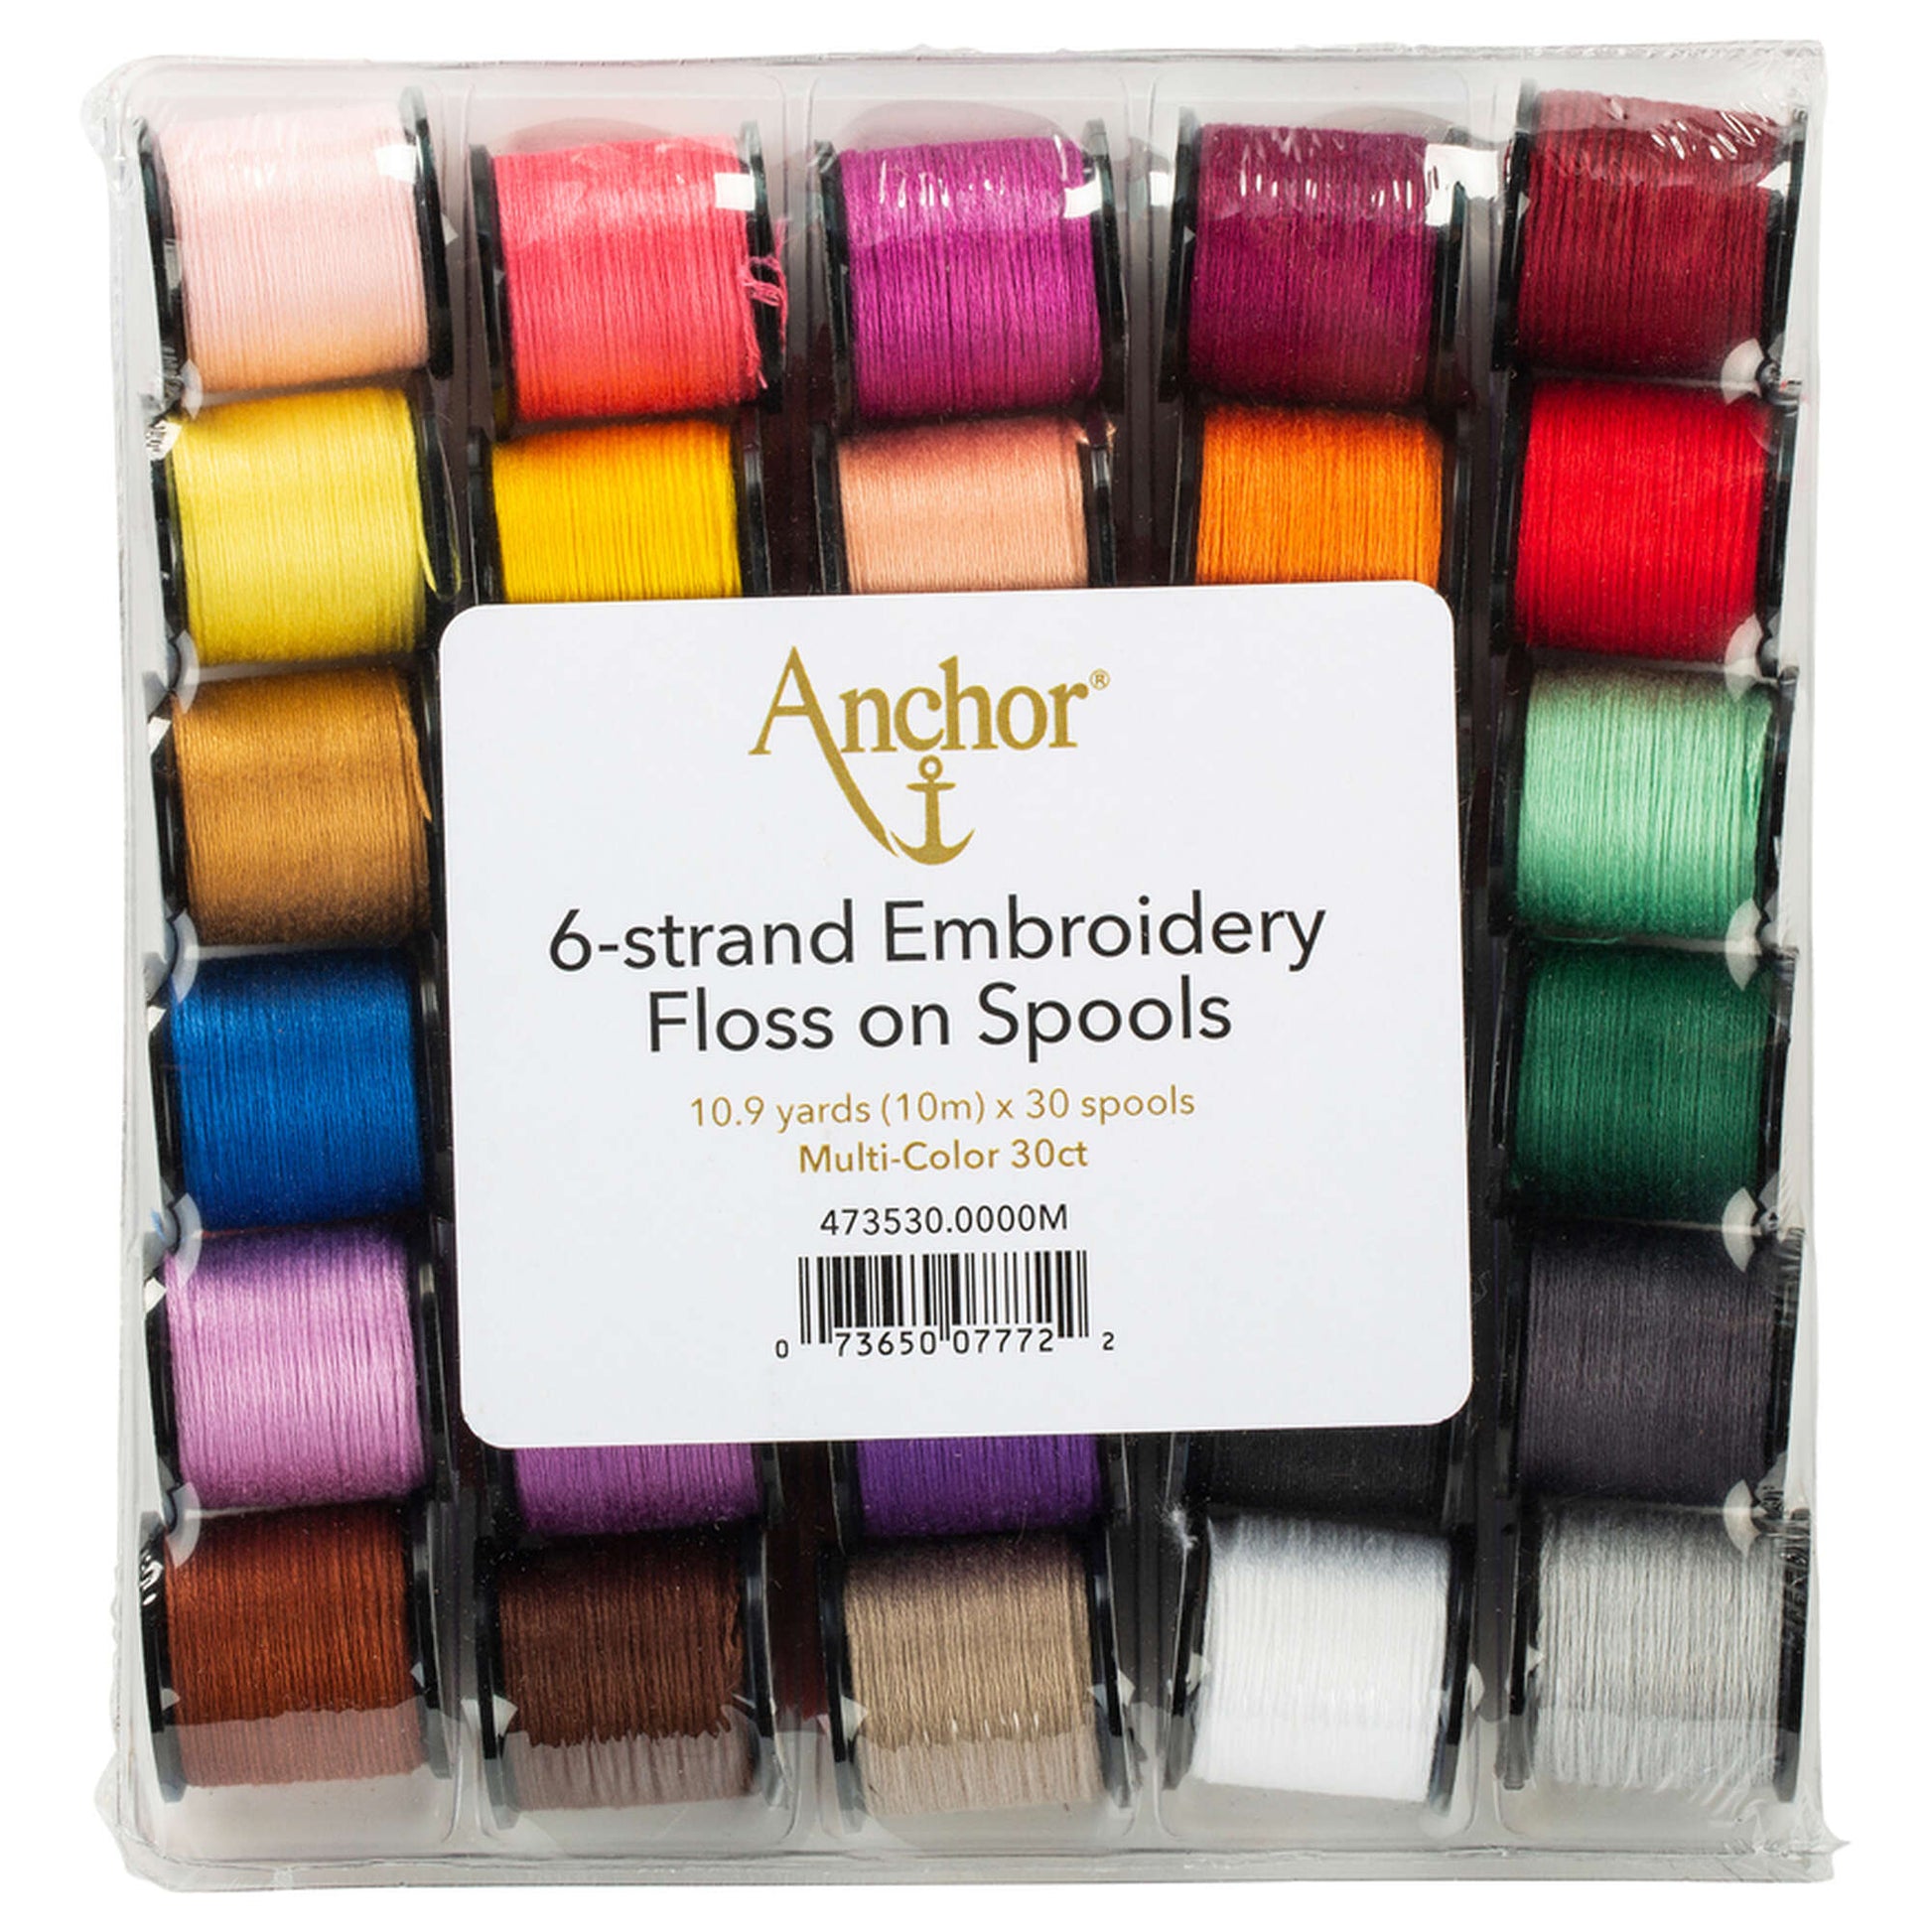 Anchor Embroidery Floss on Spools, 30 Pack